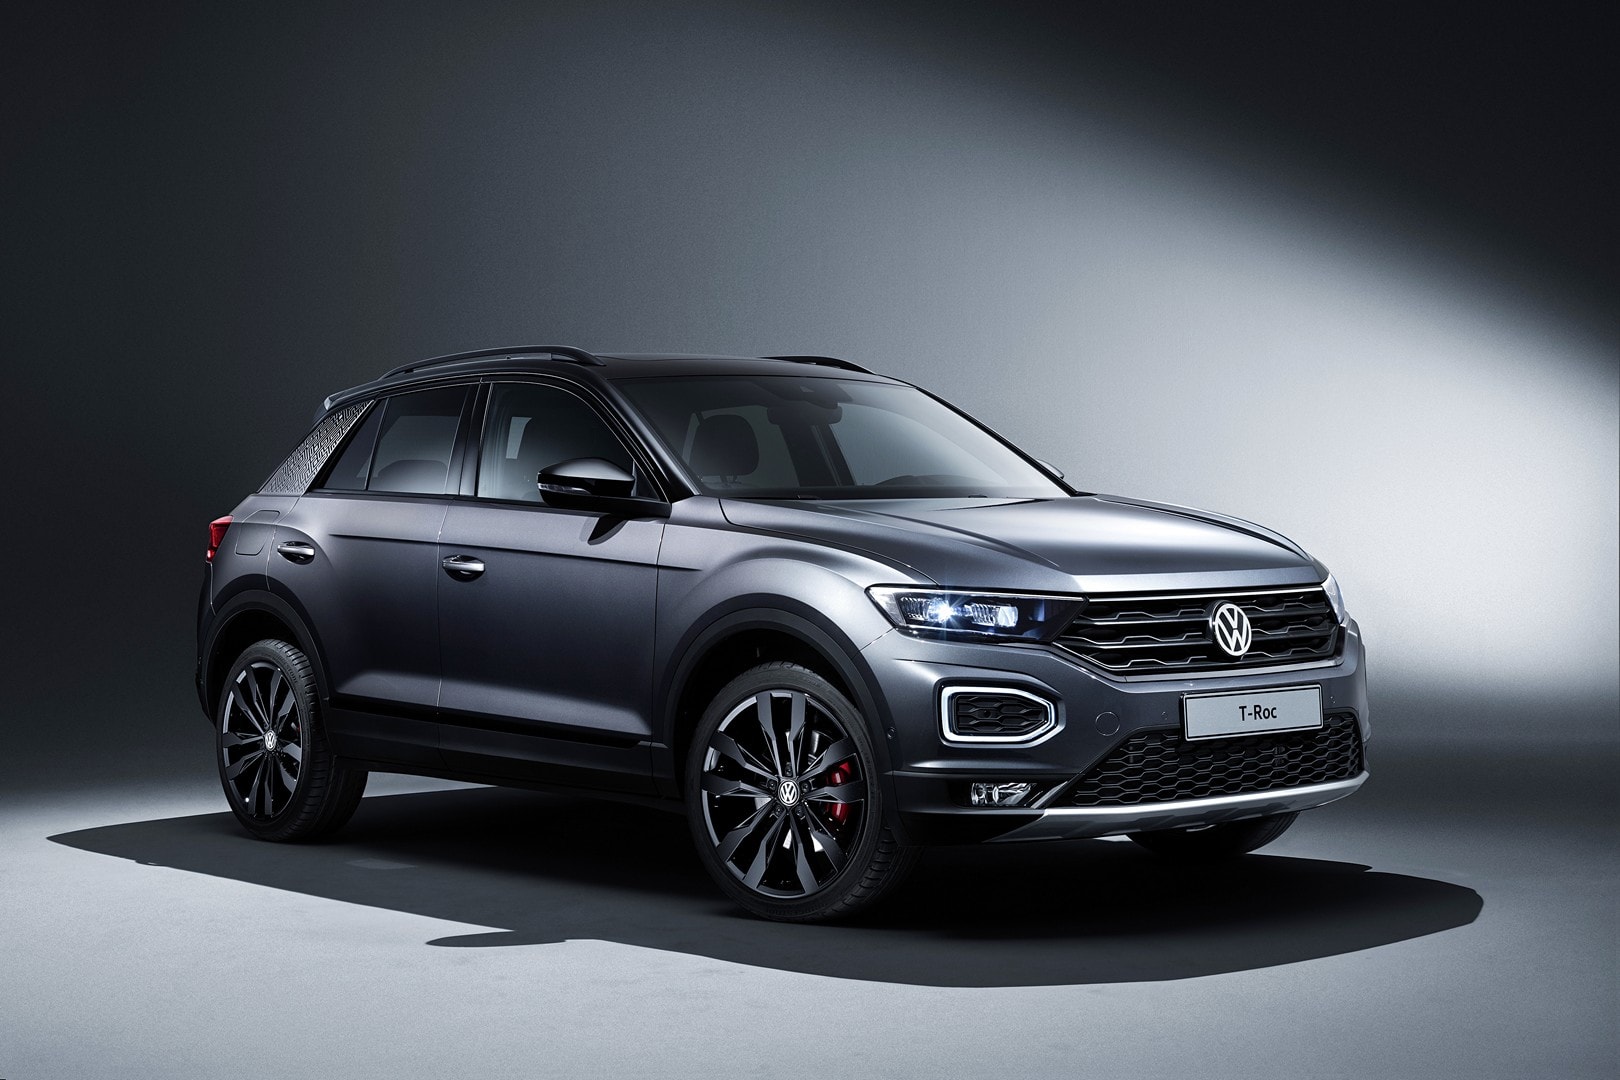 Volkswagen T-Roc Gets New 190 HP 2.0-liter TDI and Black Style